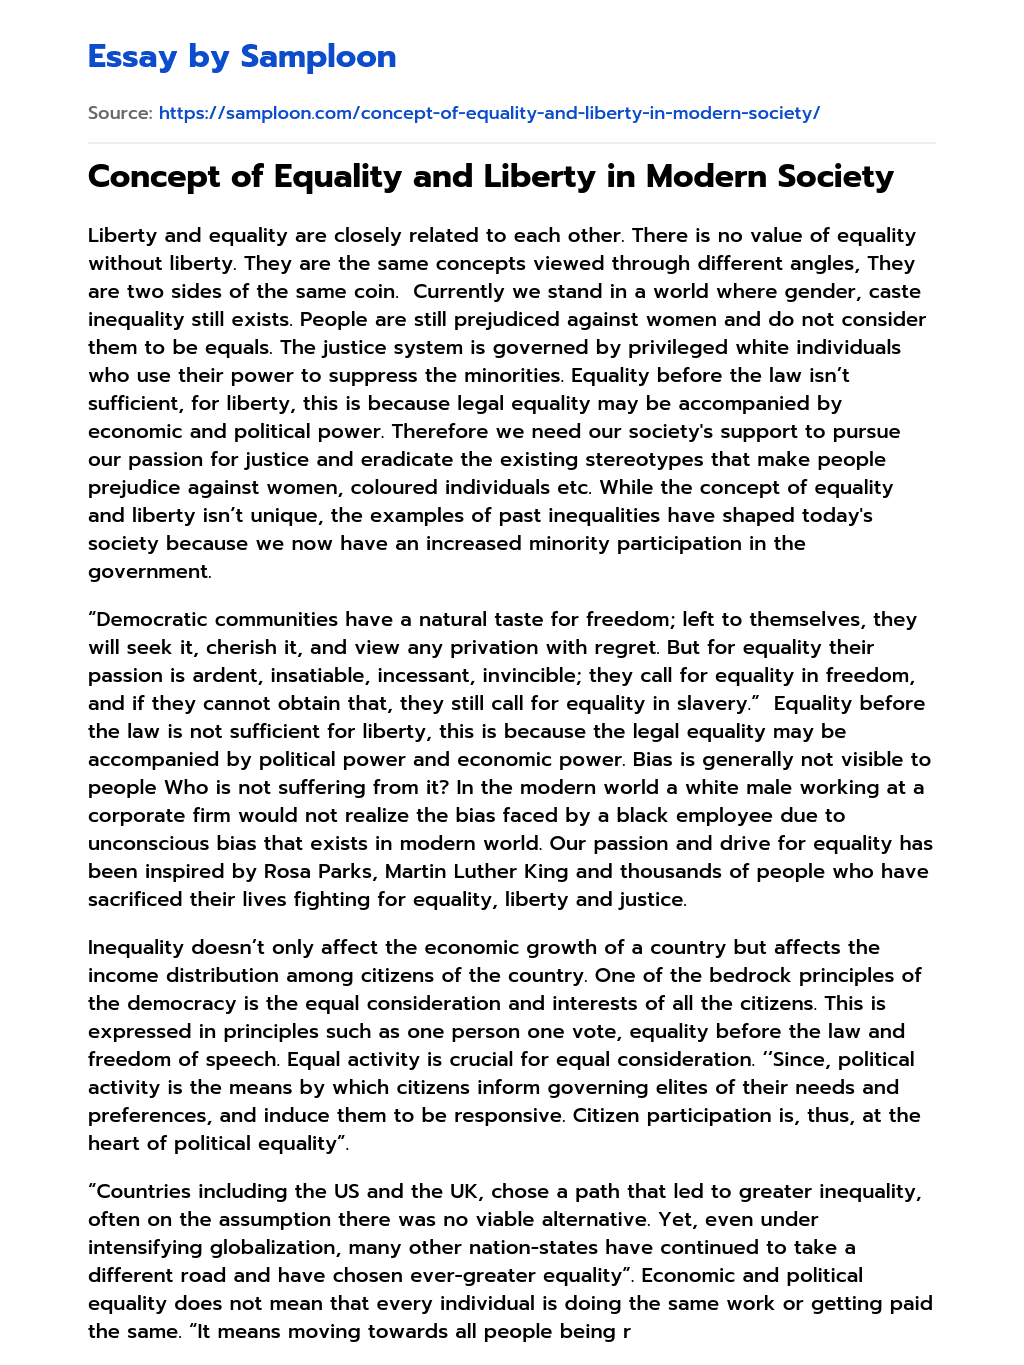 liberty equality and justice essay